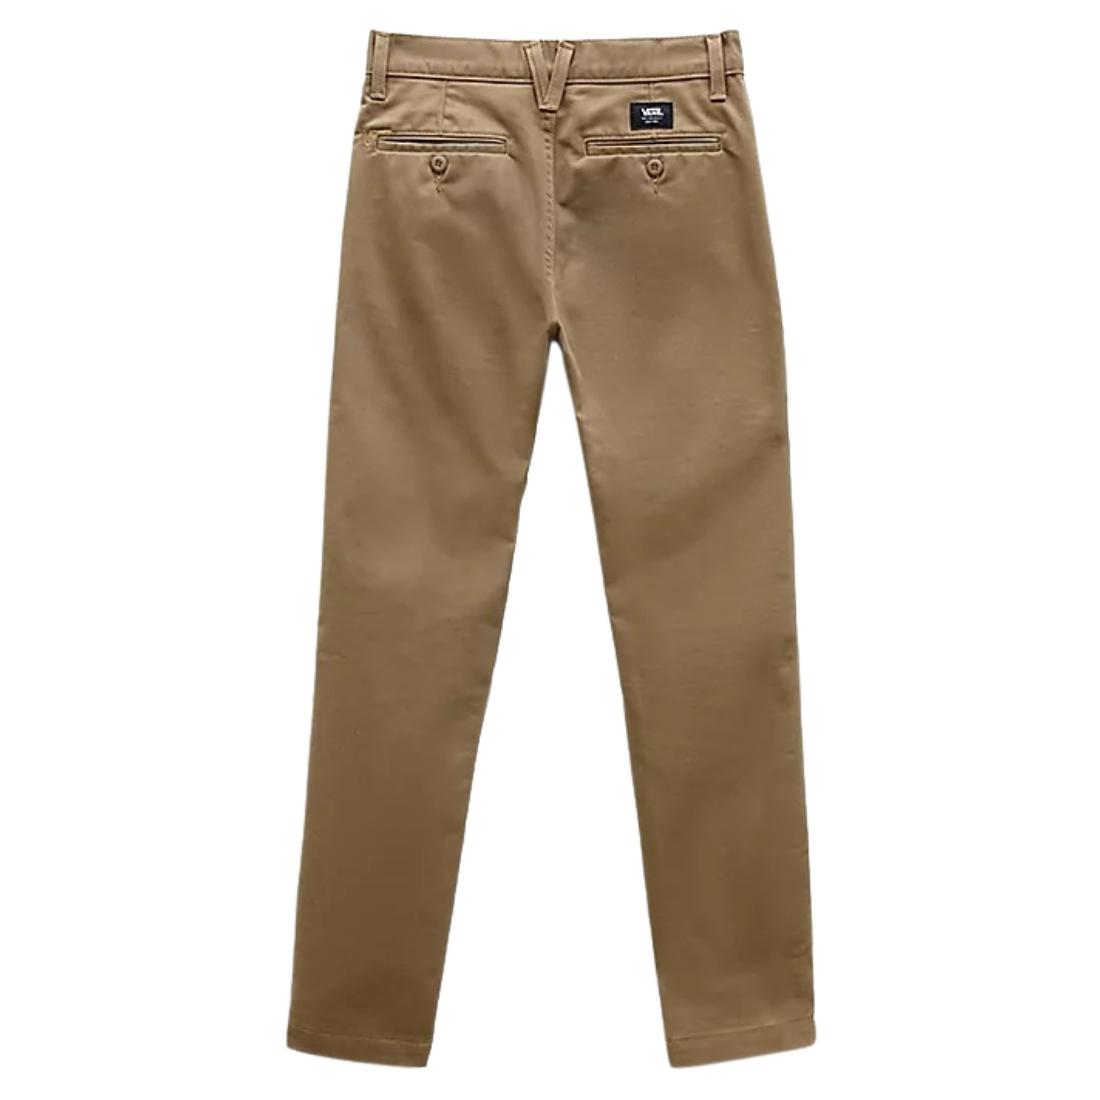 Vans Kids Authentic Chino Trousers - Dirt Brown - Boys Chino Pants/Trousers by Vans